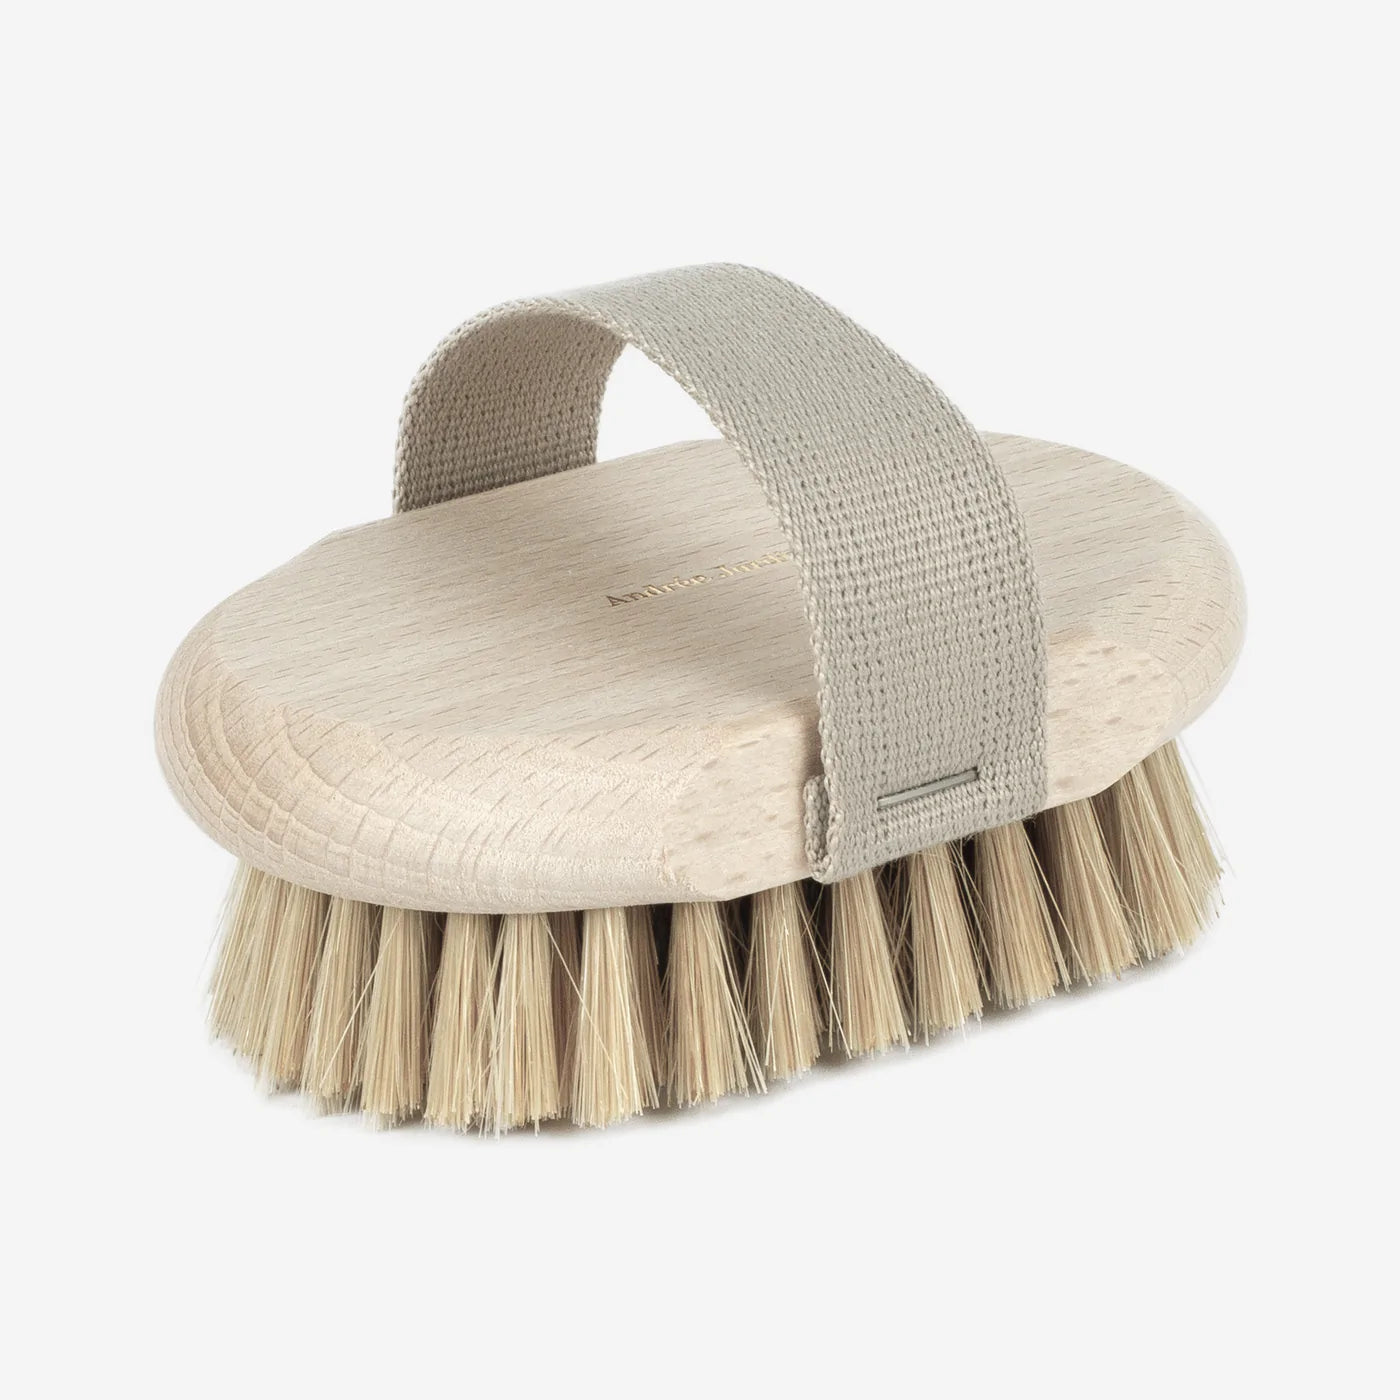 Massage Brush With Cotton Strap ~ Made in France